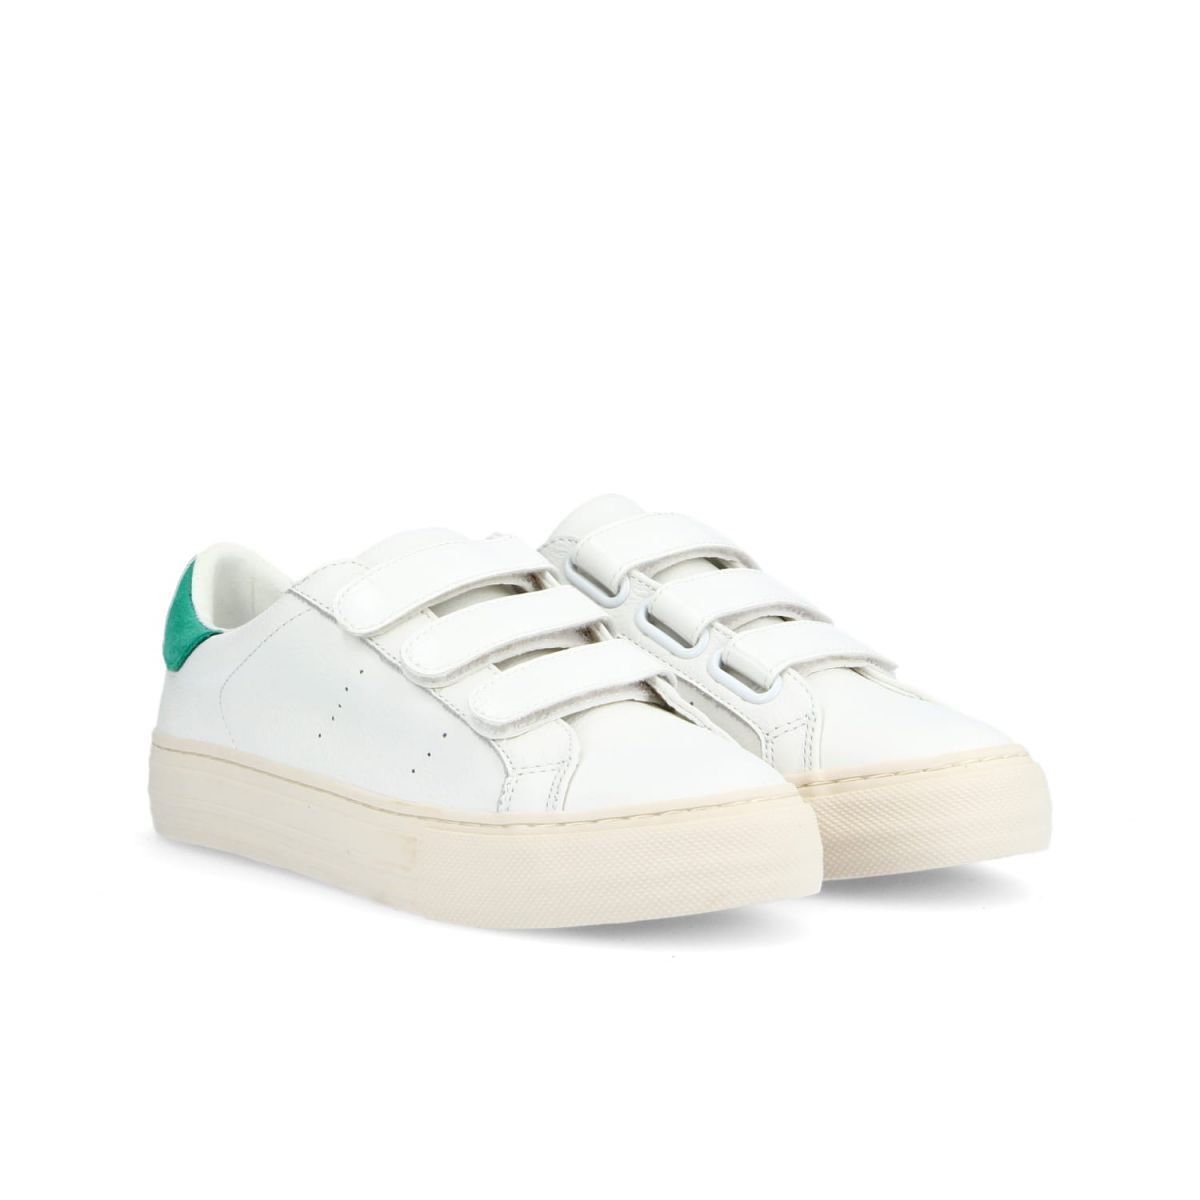 Arcade Straps White Menthe Sneakers KNGDRG042U - 2